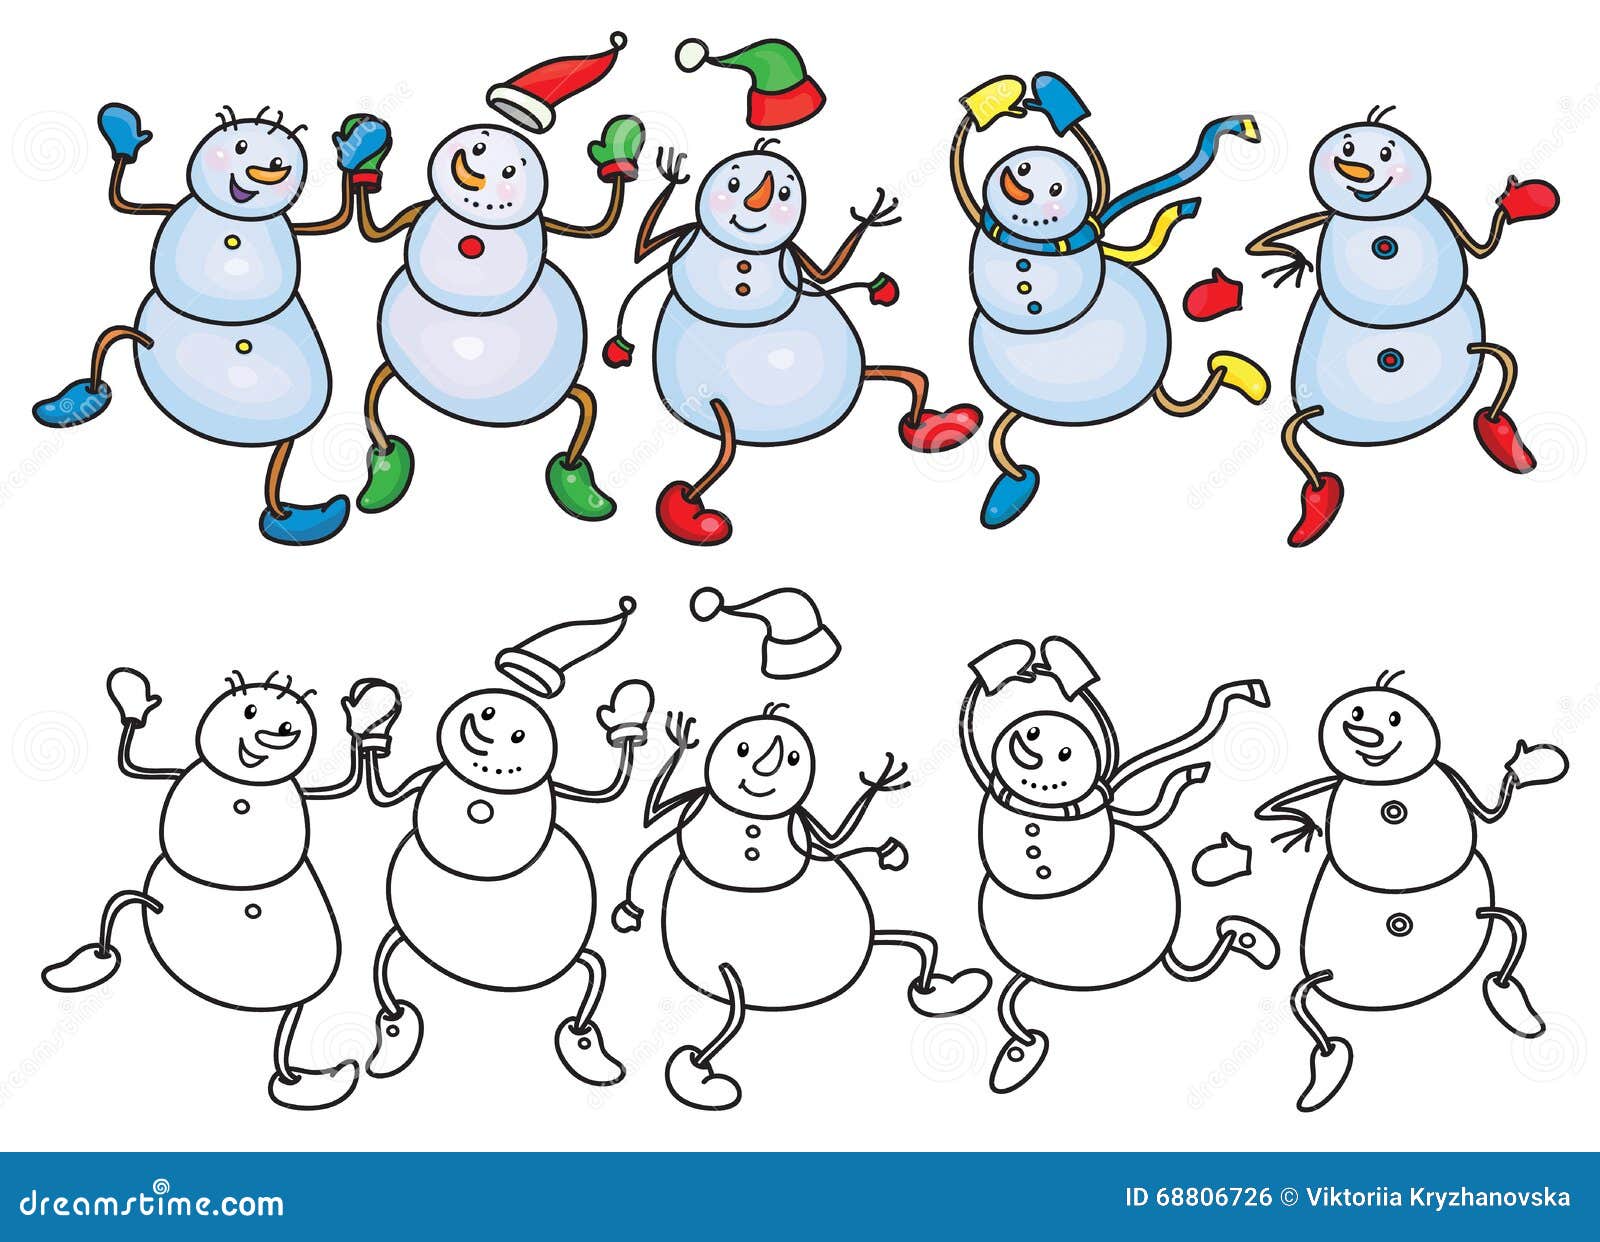 dancing snowman coloring pages - photo #35